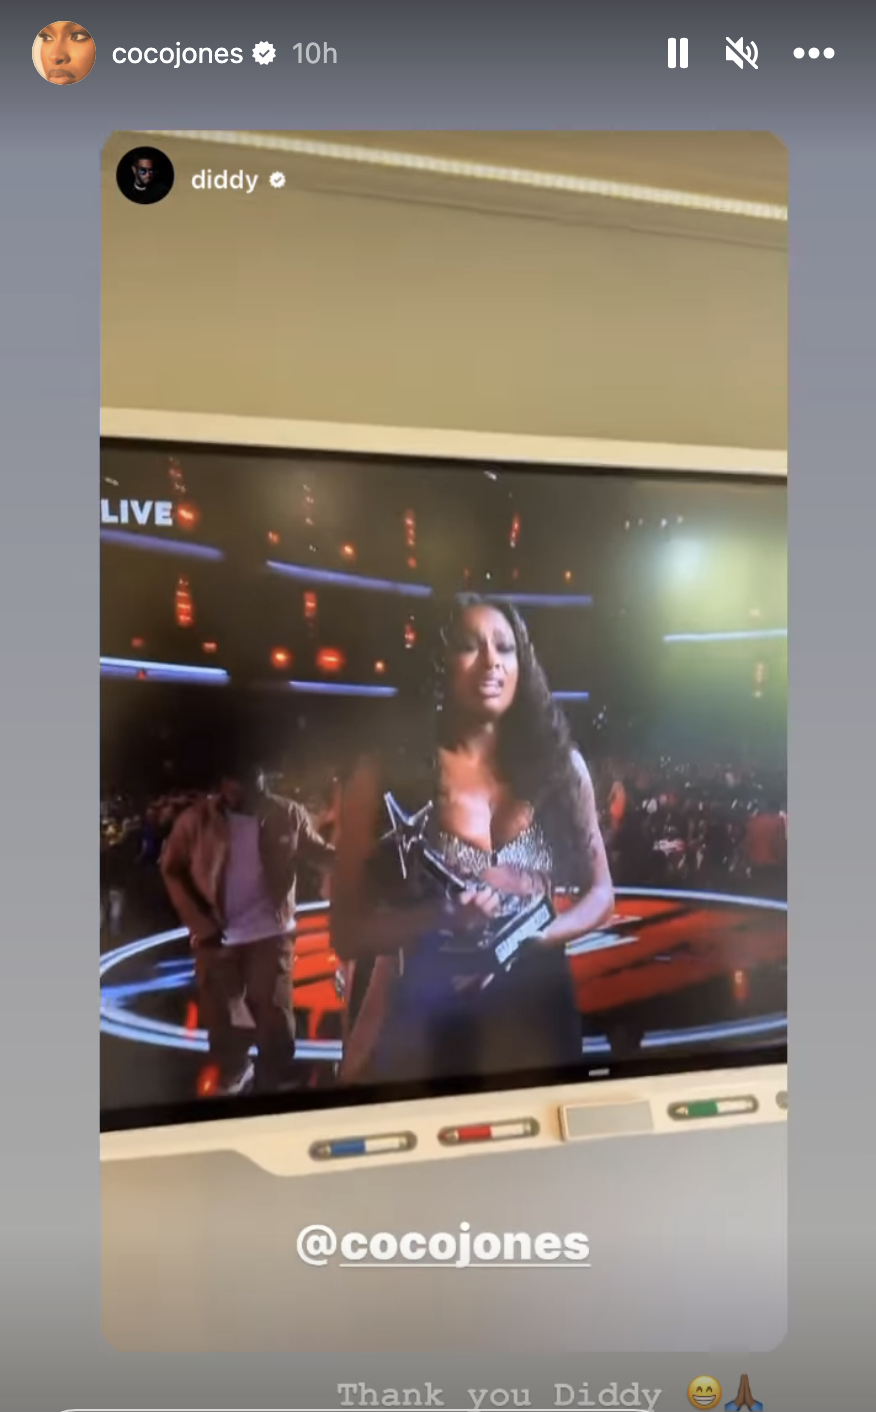 Coco posted Diddy posting her on his IG accepting her award on TV with caption &quot;Thank you Diddy&quot;